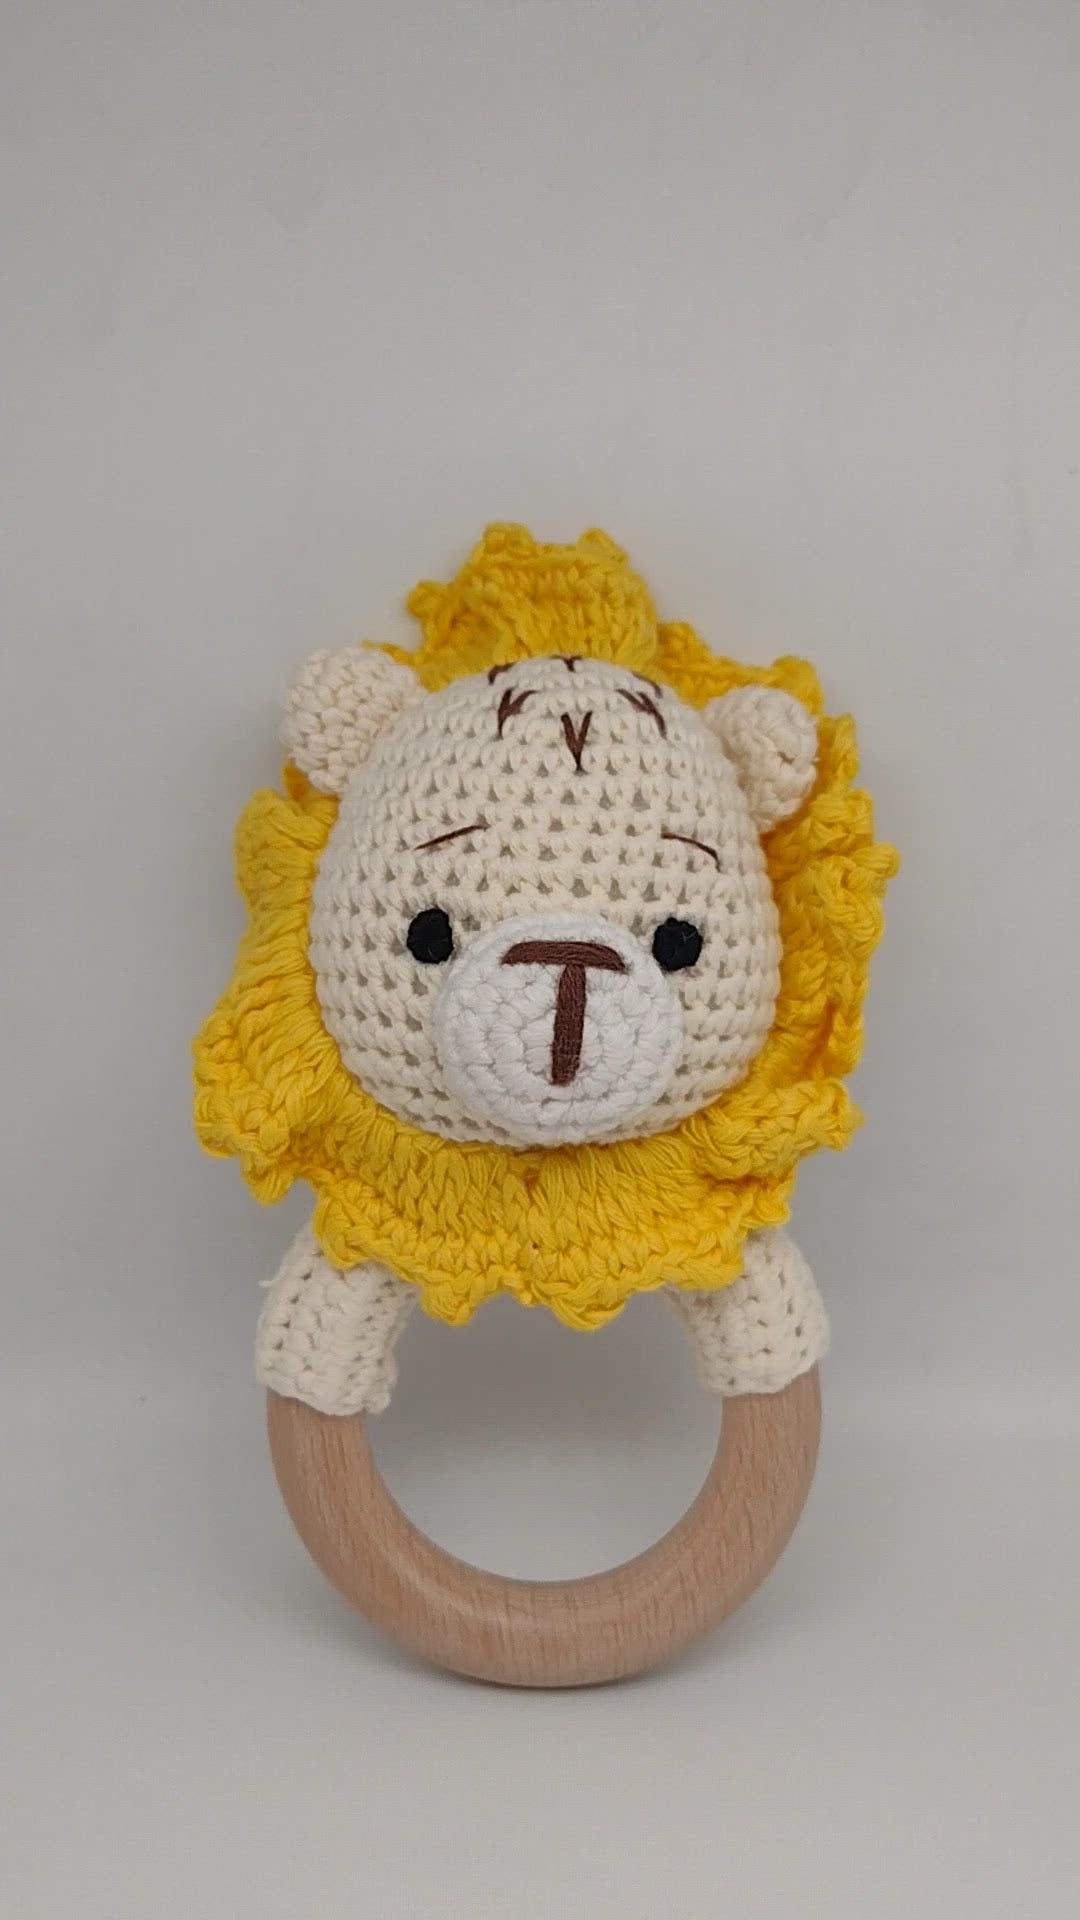 Handmade Lion Teether / Rattle (Name or Name + DOB) Personalised